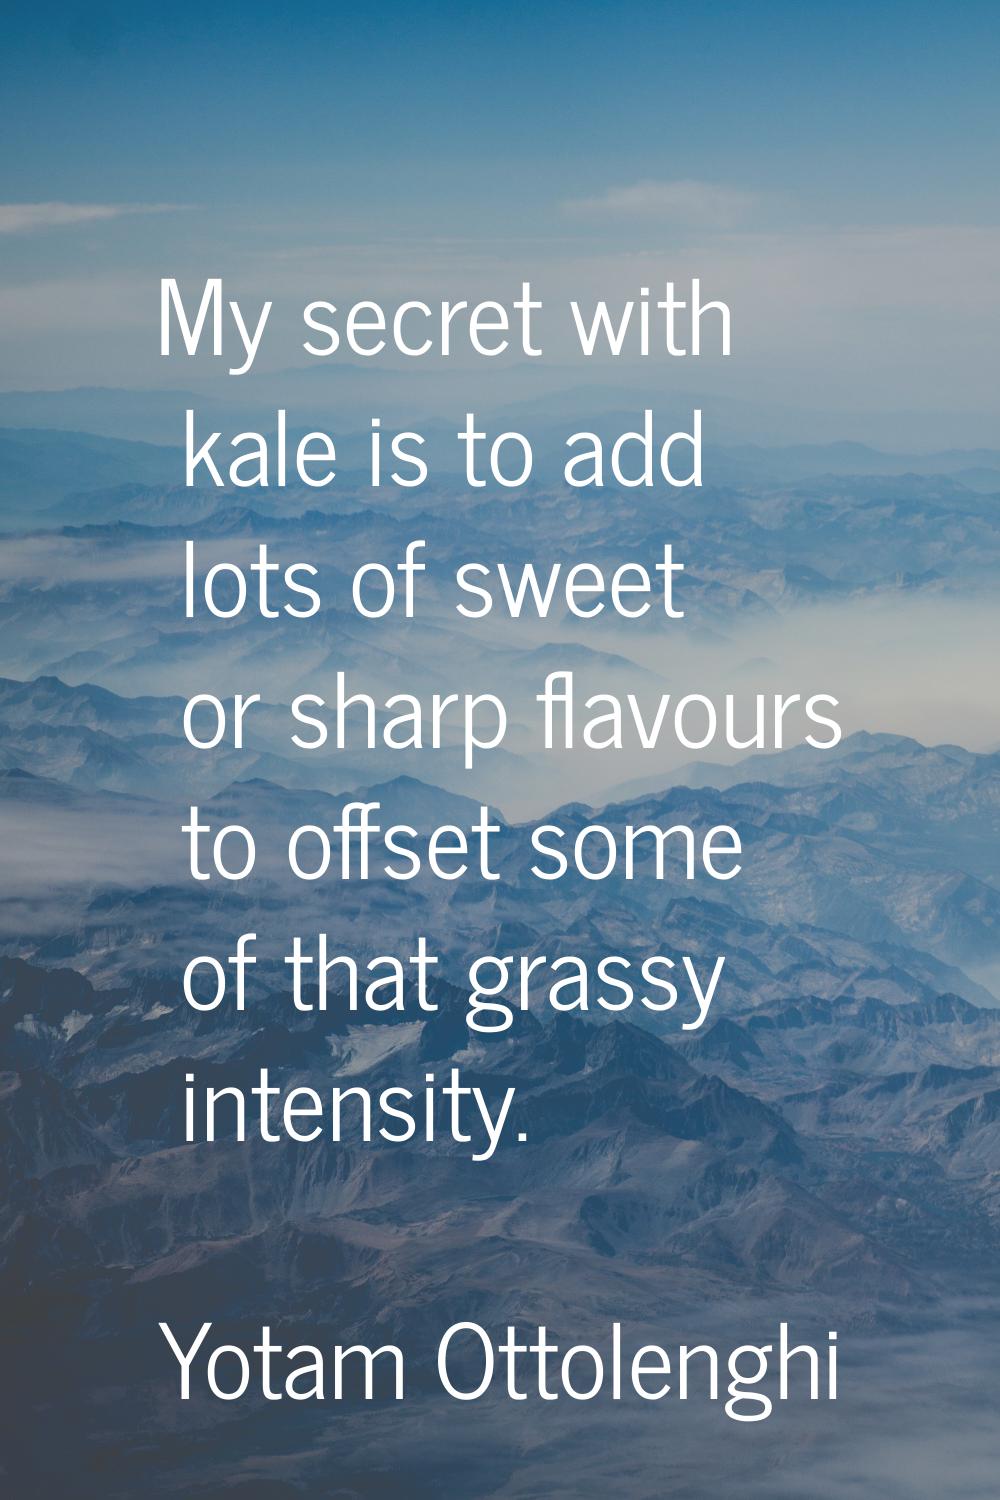 My secret with kale is to add lots of sweet or sharp flavours to offset some of that grassy intensi